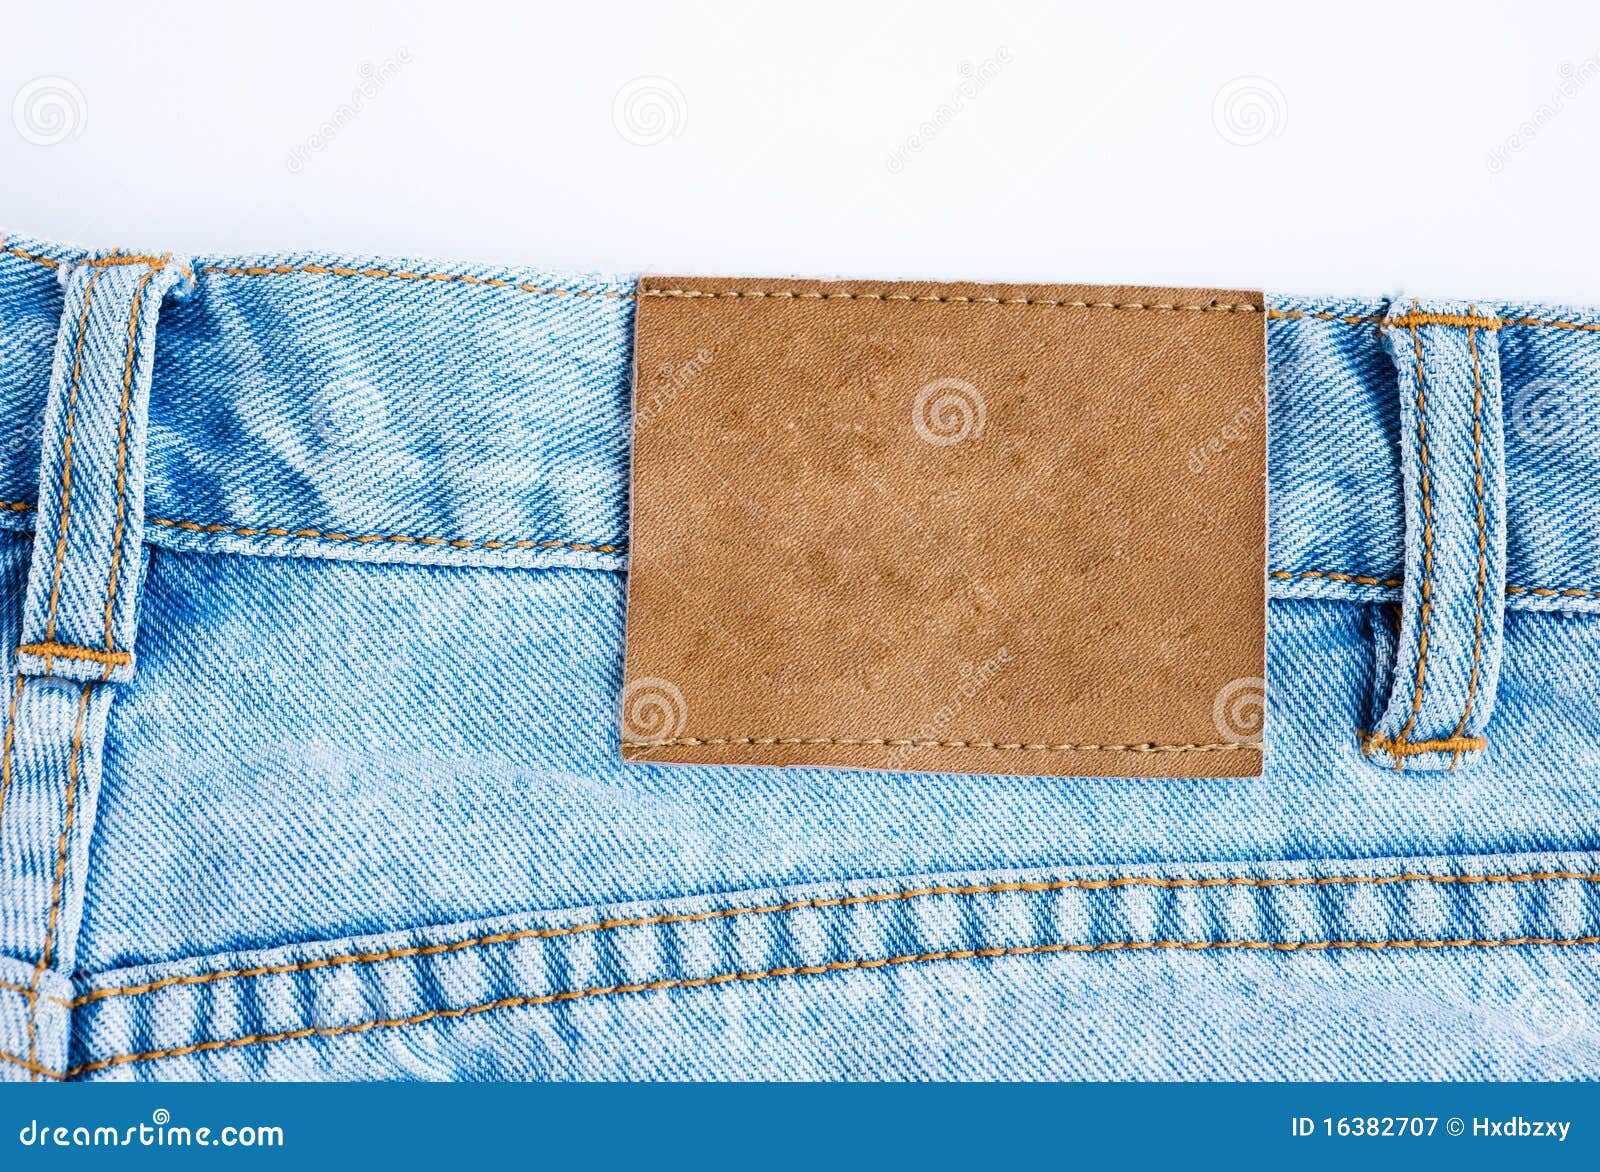 Blank leather label stock image. Image of jeans, border - 16382707